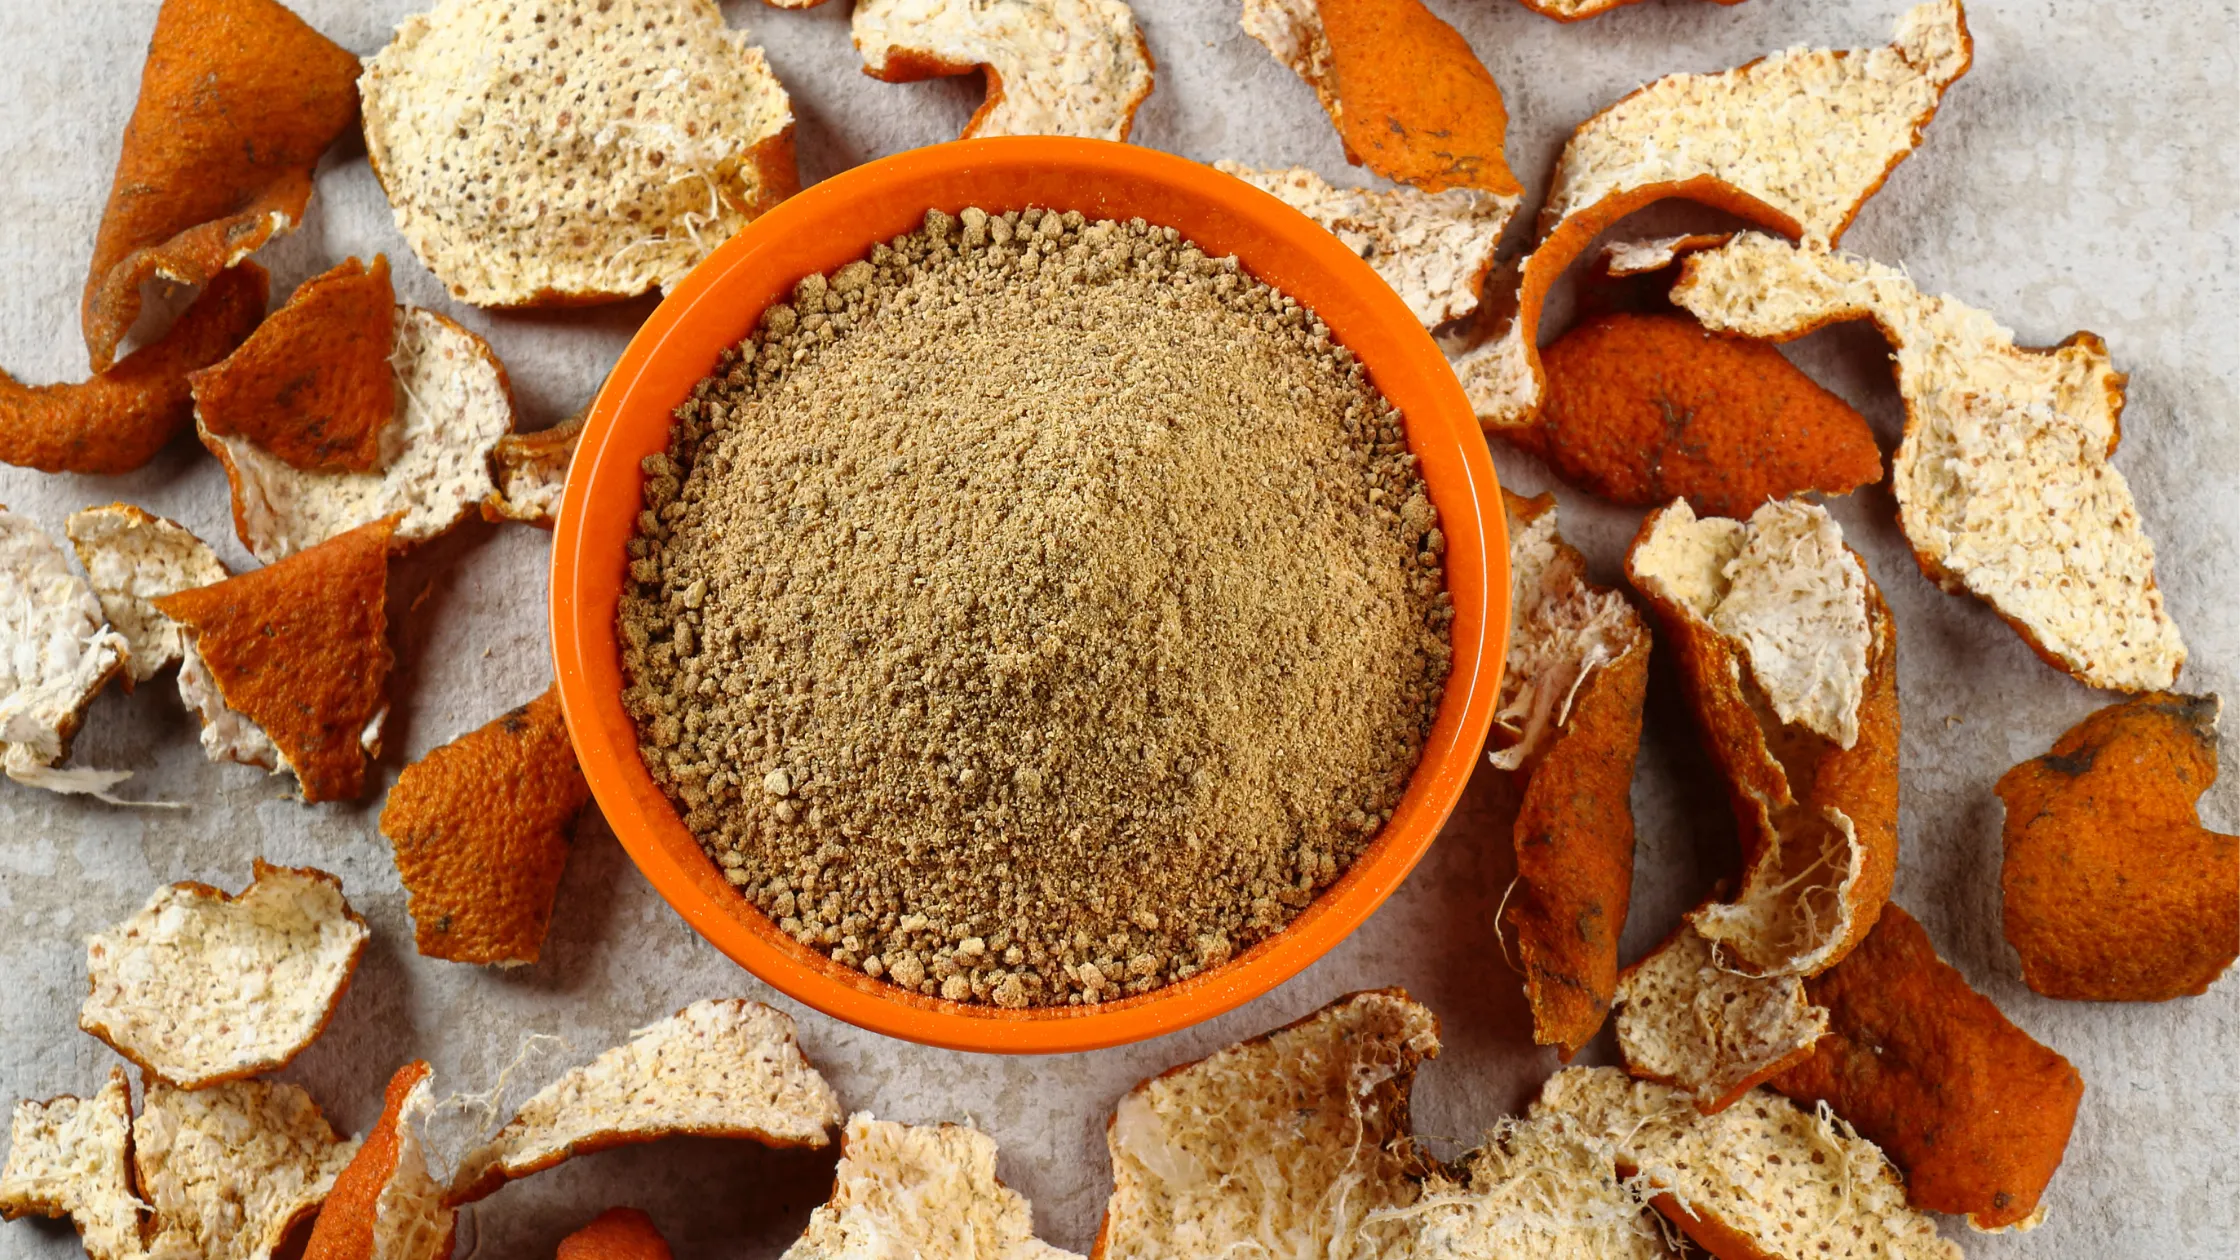 10 Ways Orange Peel Powder for Face Can Brighten Your Skin Naturally